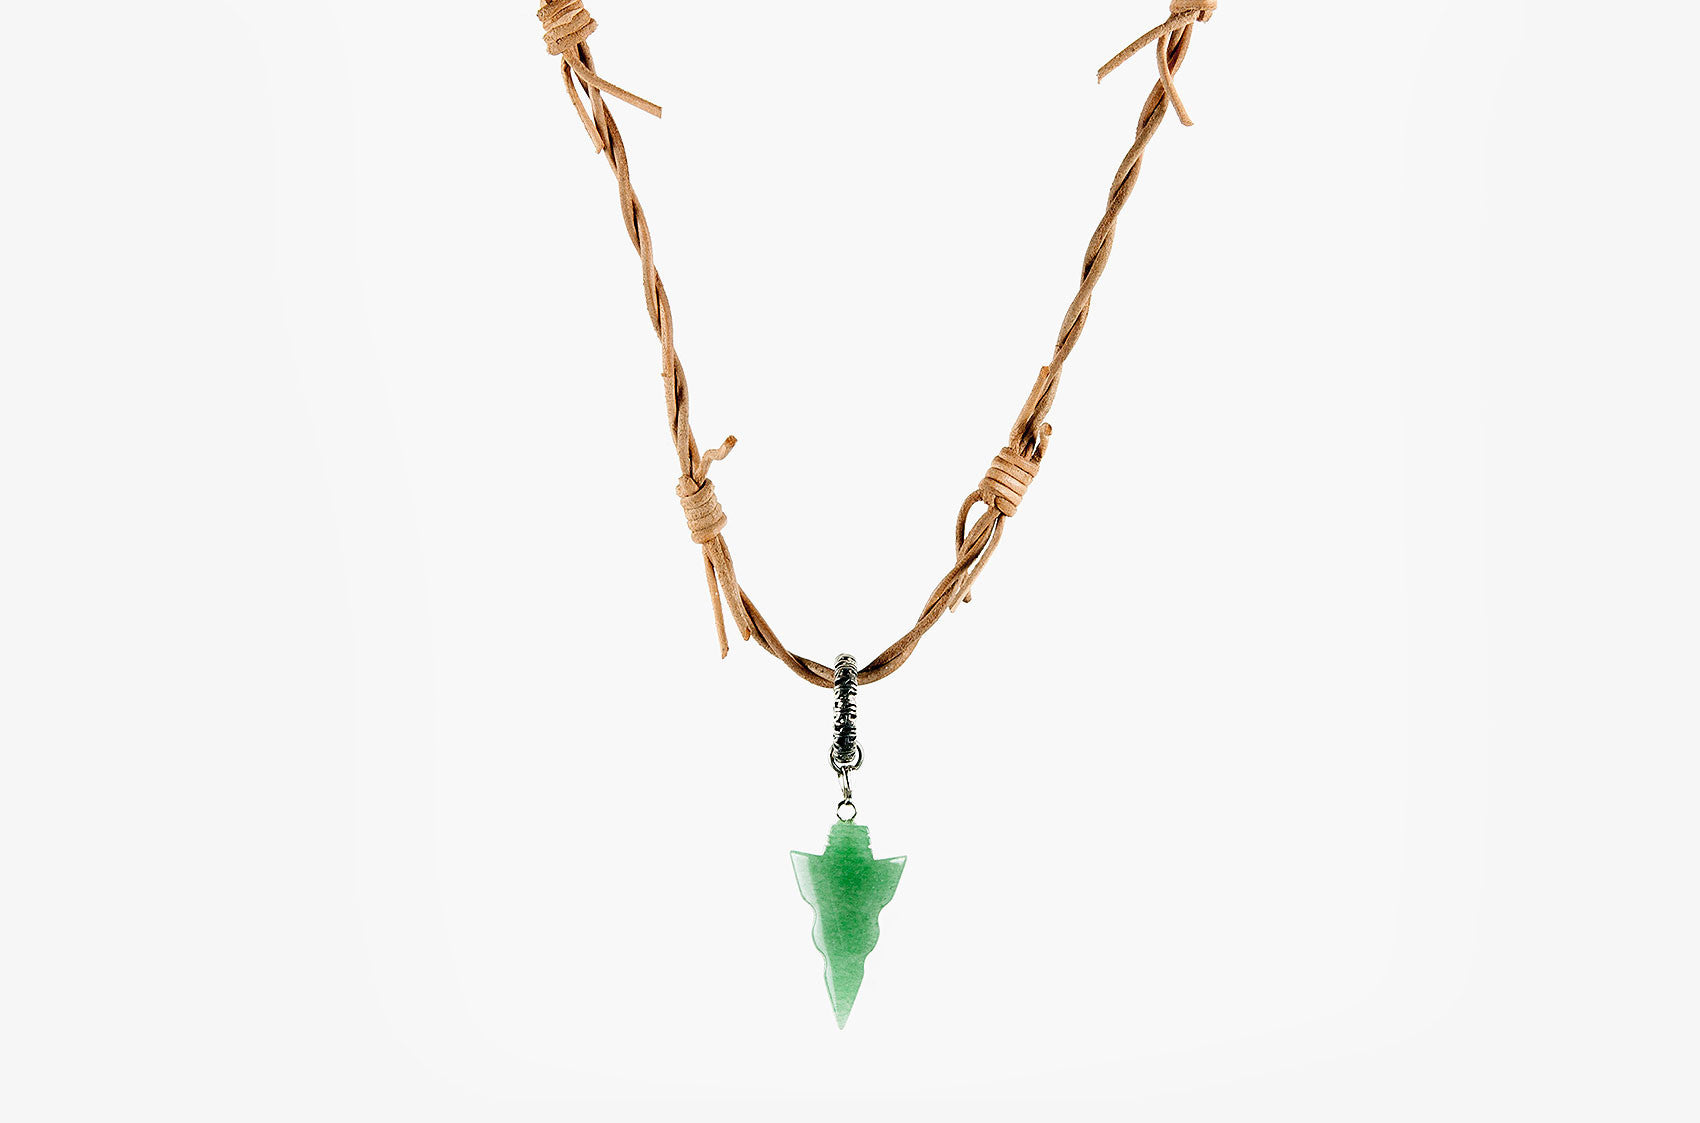 Barbed leather wrap necklace with jade arrow pendant